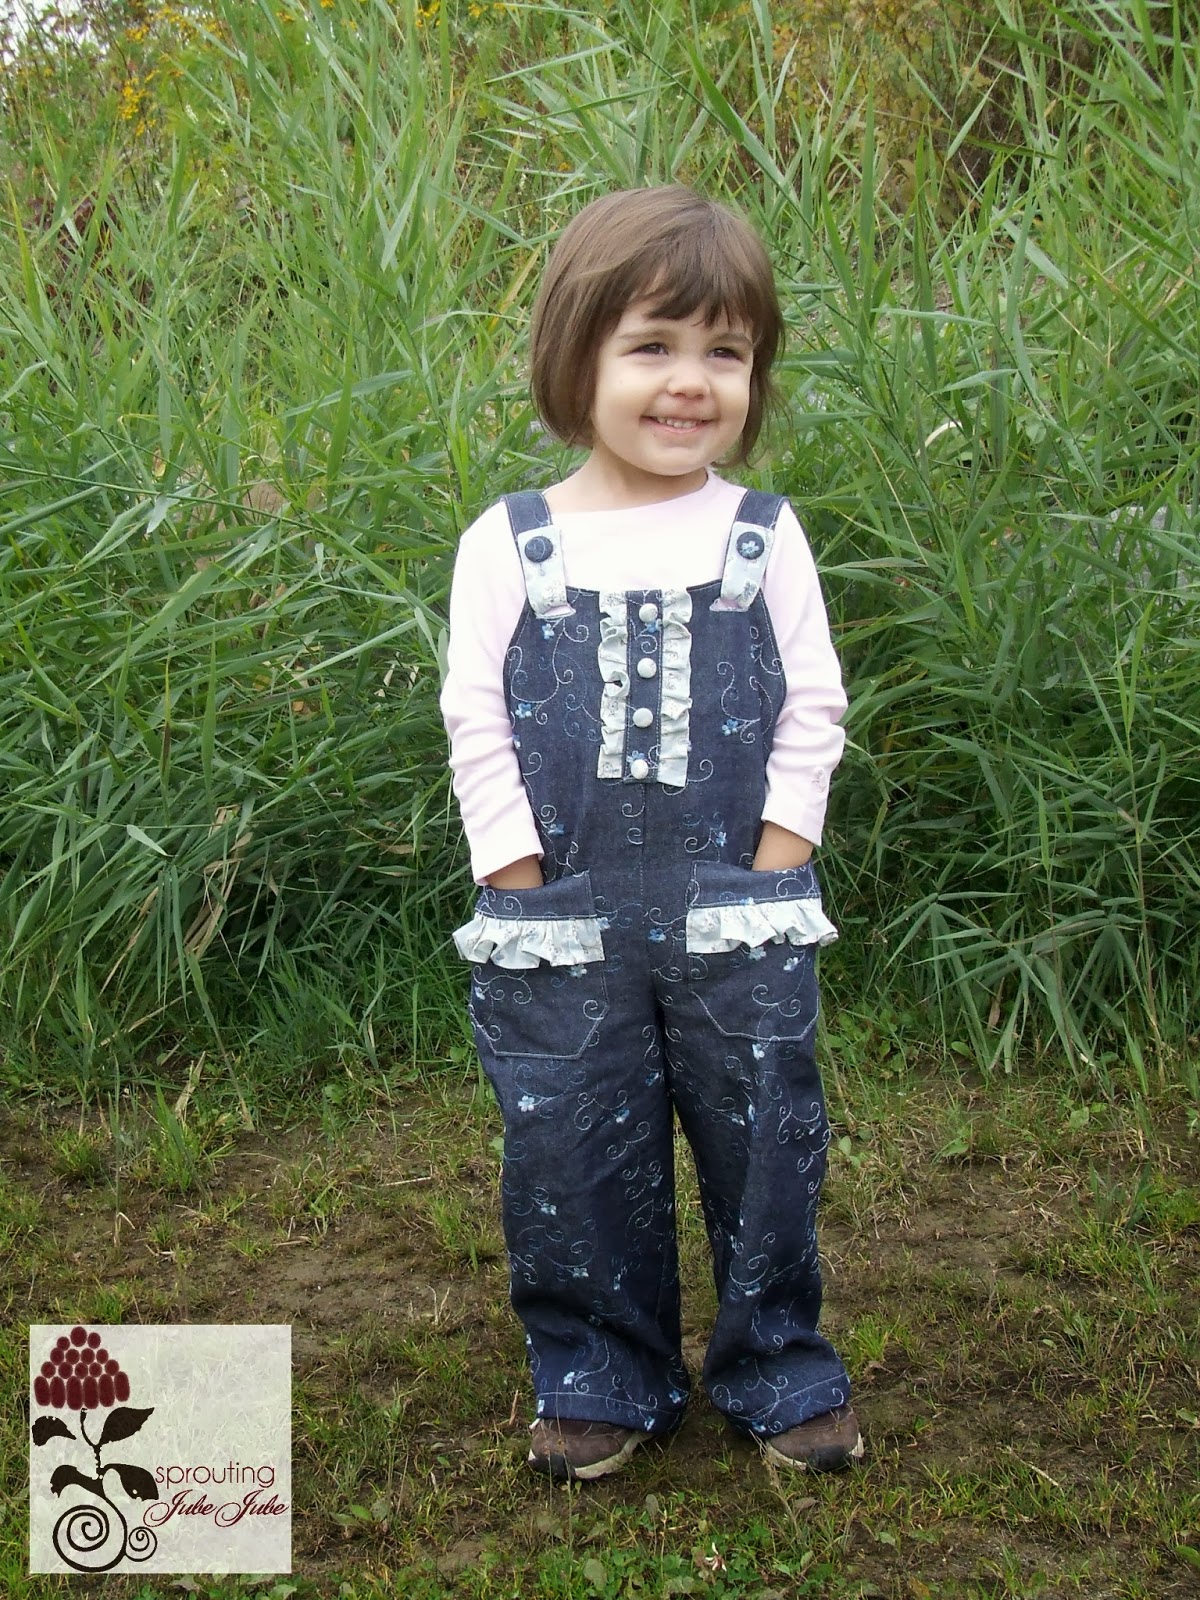 Sprouting JubeJube: Georgie Girl Coveralls by Ruby Jean's Closet